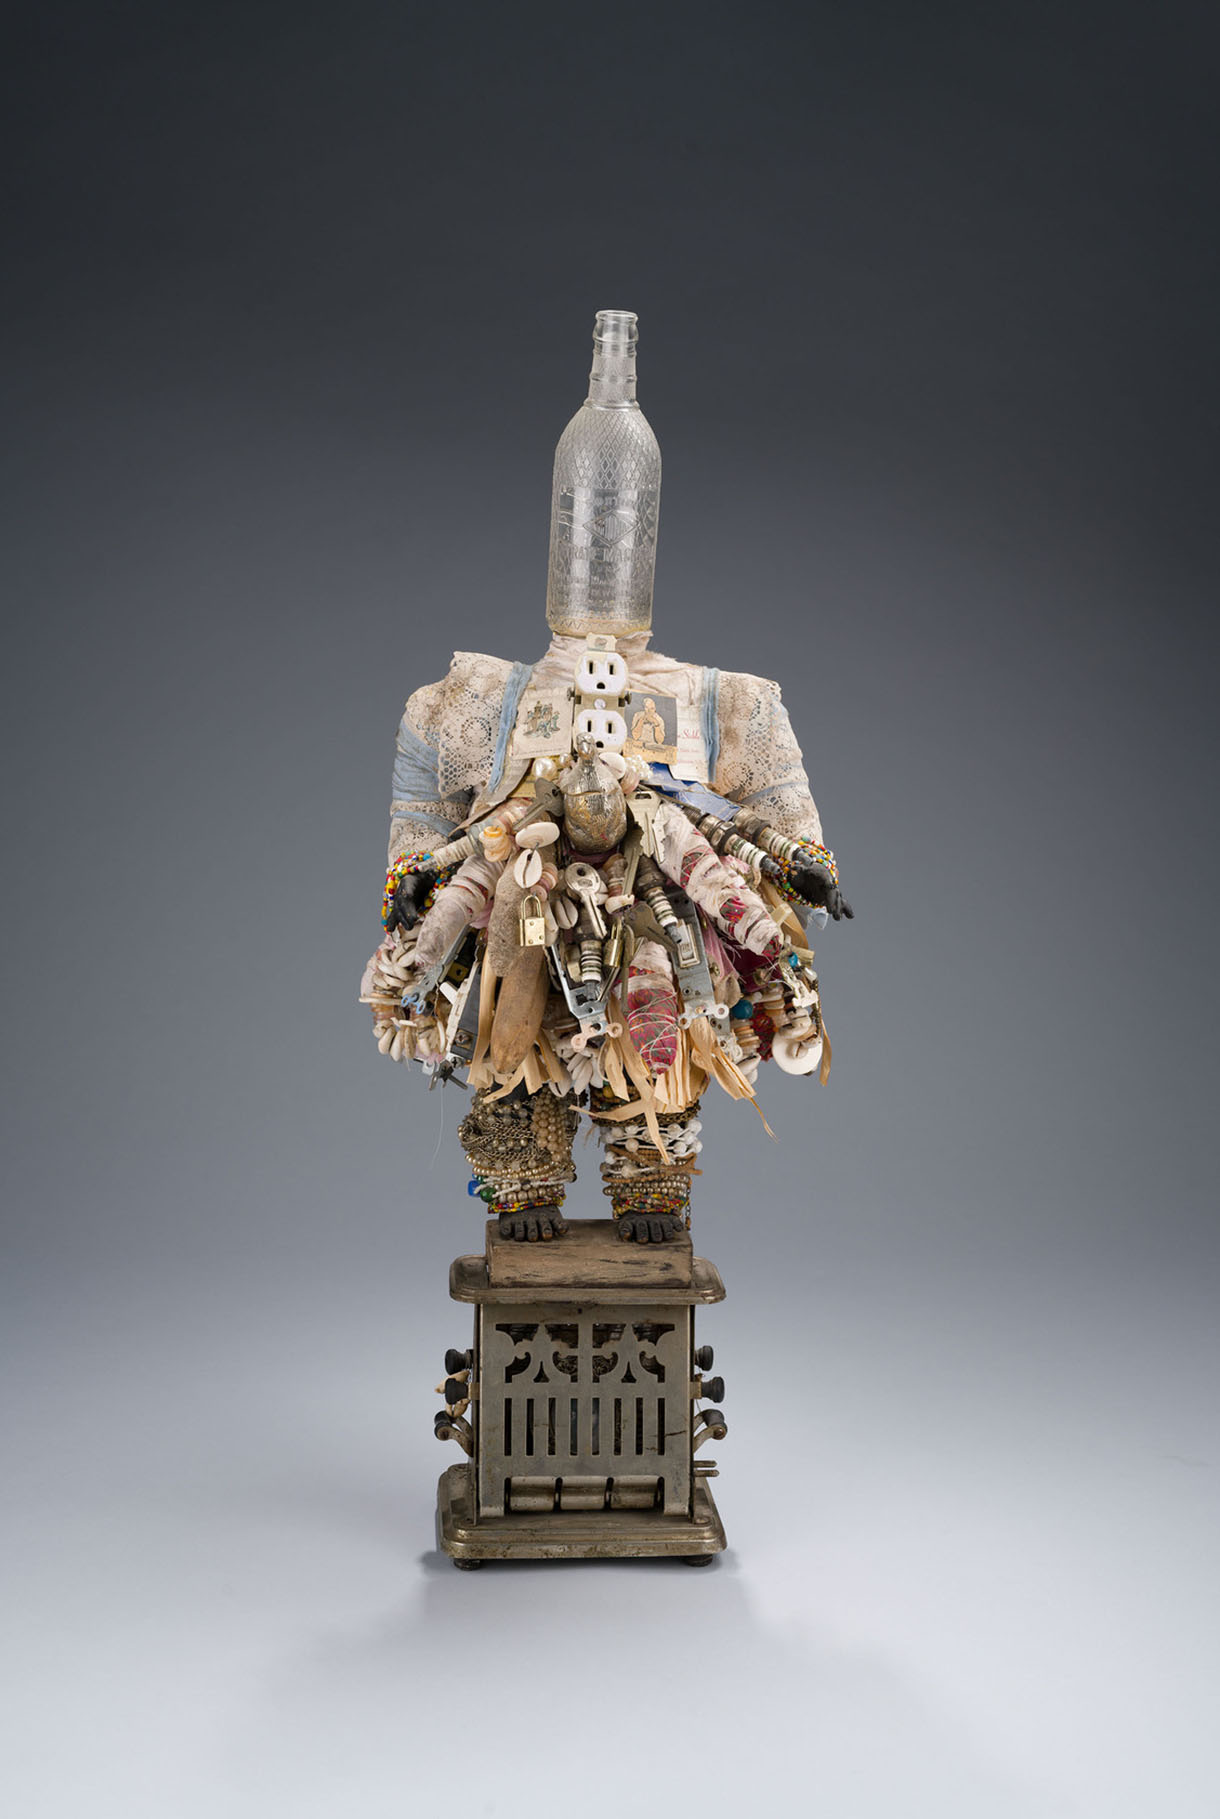 A sculpture depicts a human figure made from found objects, with a glass bottle forming the head, doll parts forming the limbs, and adornments made from items including beads, fabric, an electrical outlet, and the framed slave ownership photograph of a woman named Delilah.